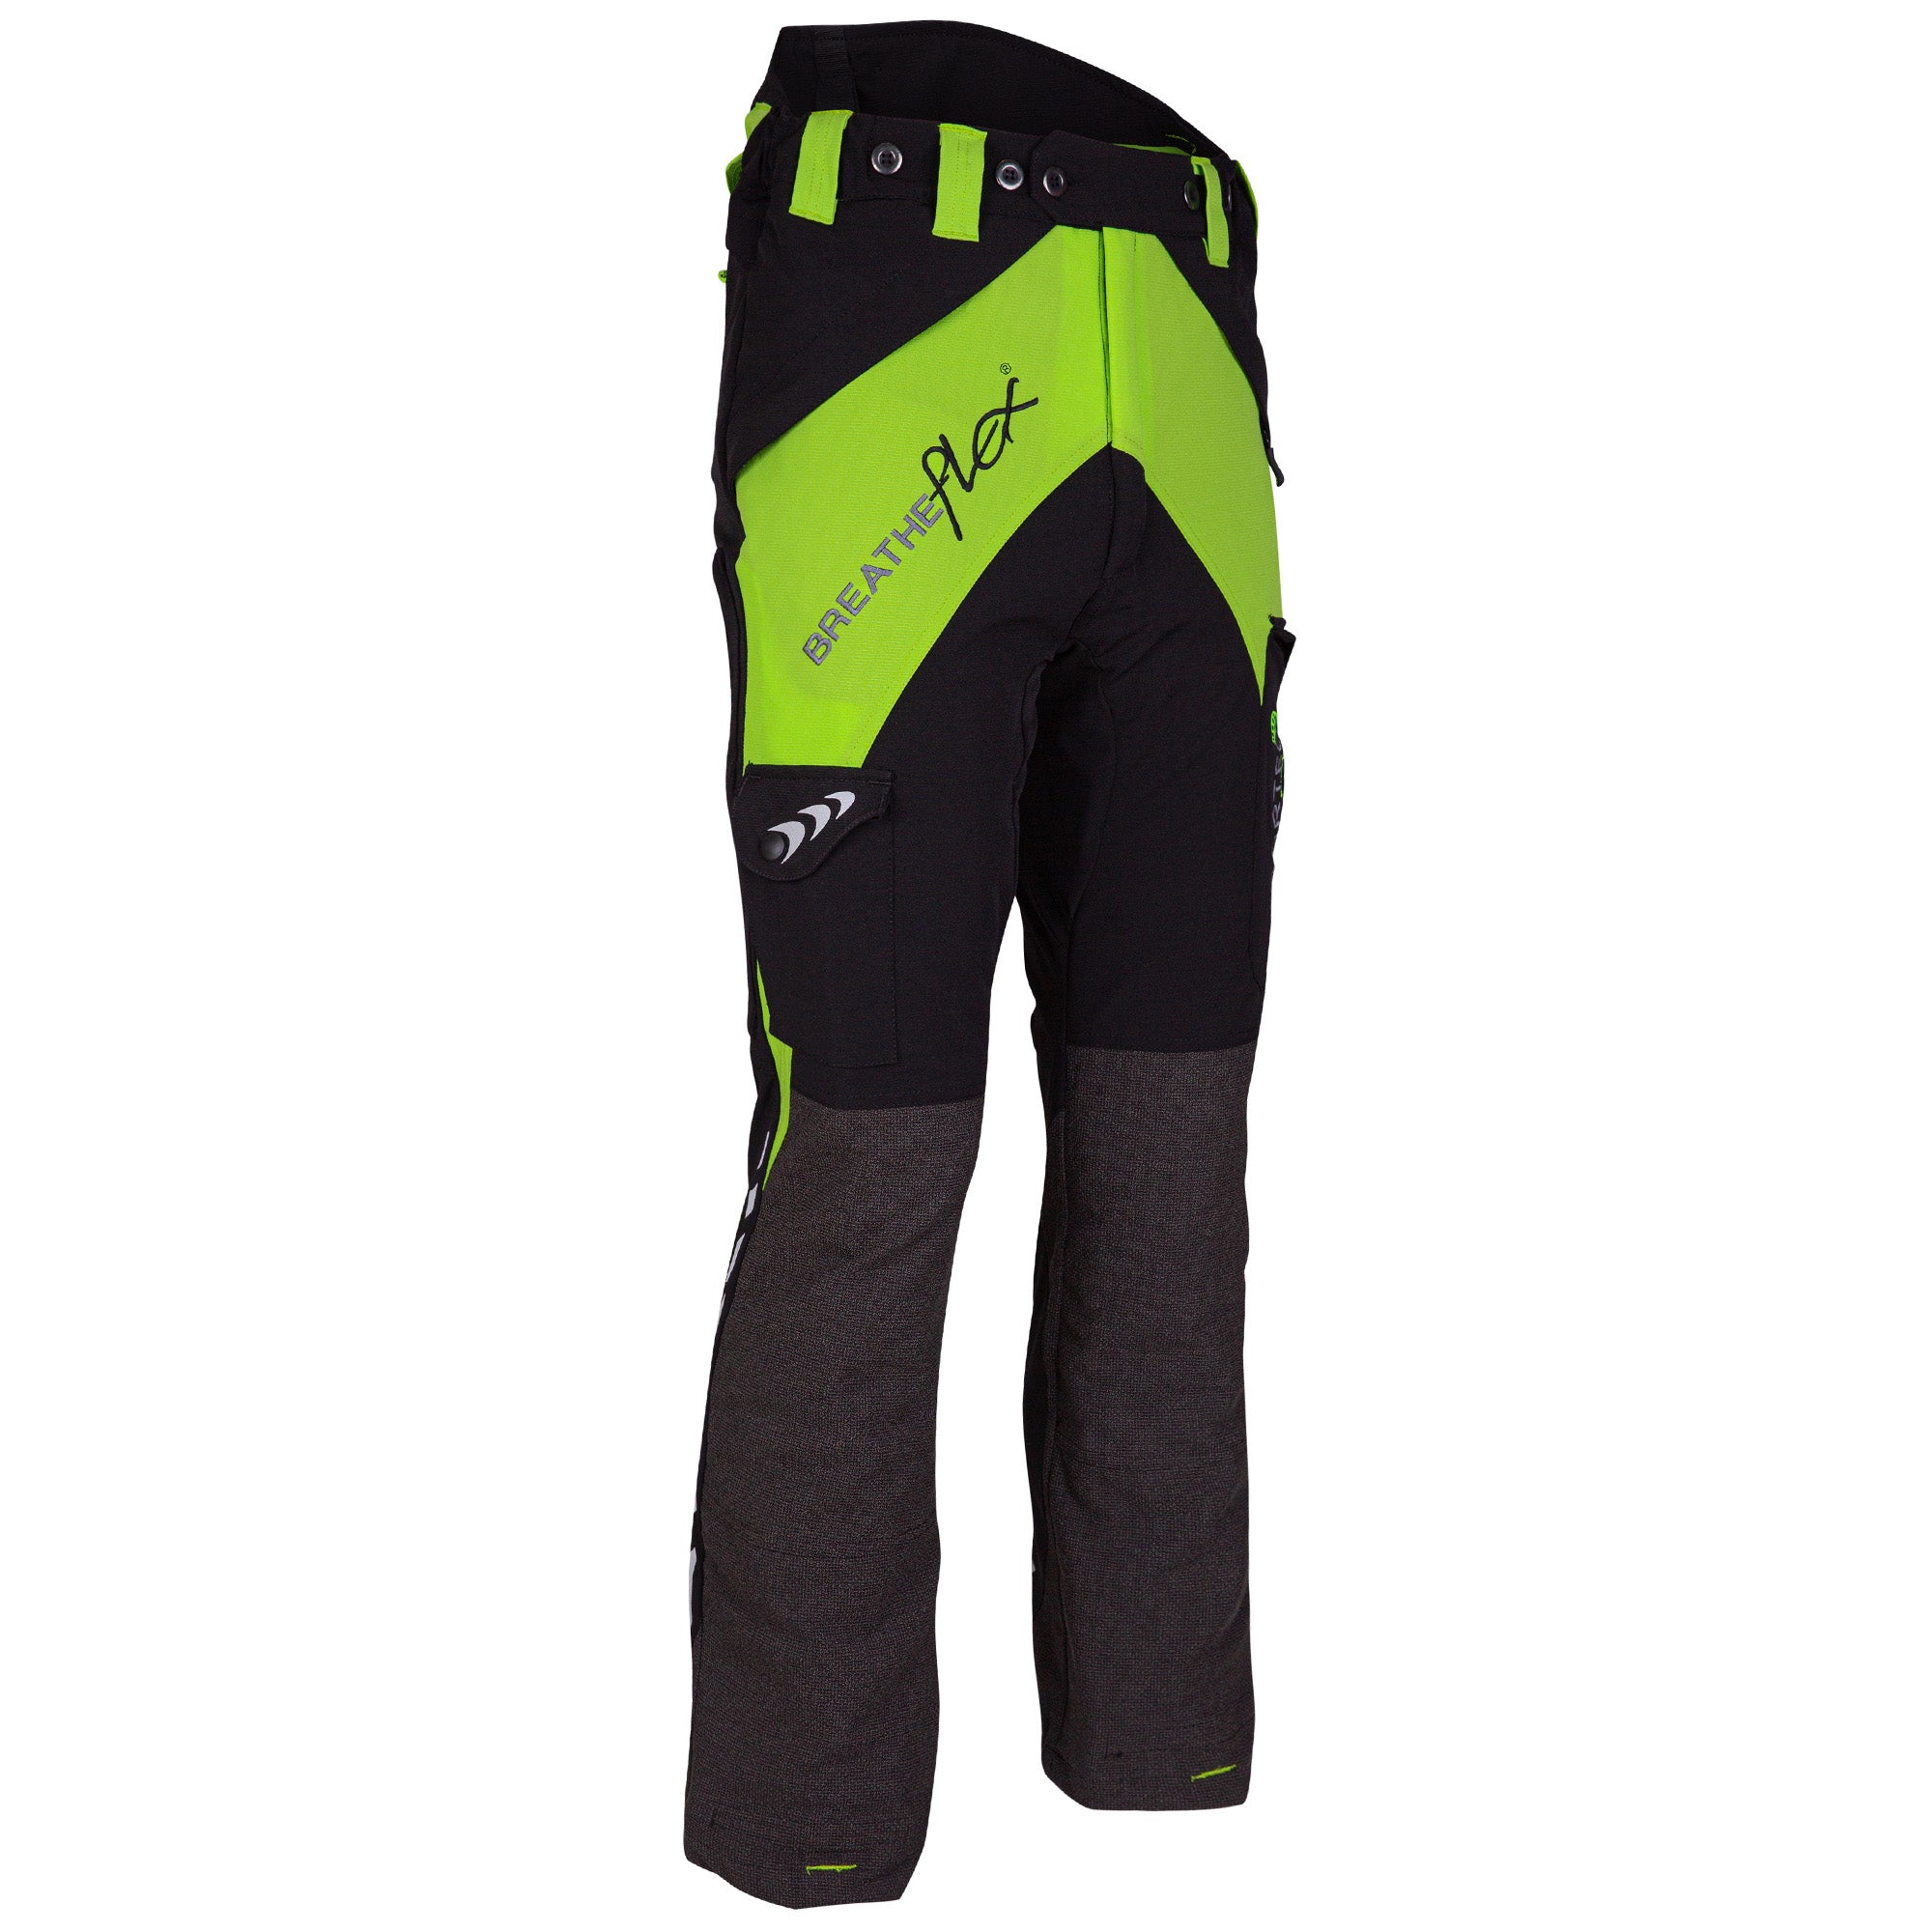 AT4020 Breatheflex Chainsaw Trousers Design A Class 2 - Lime.